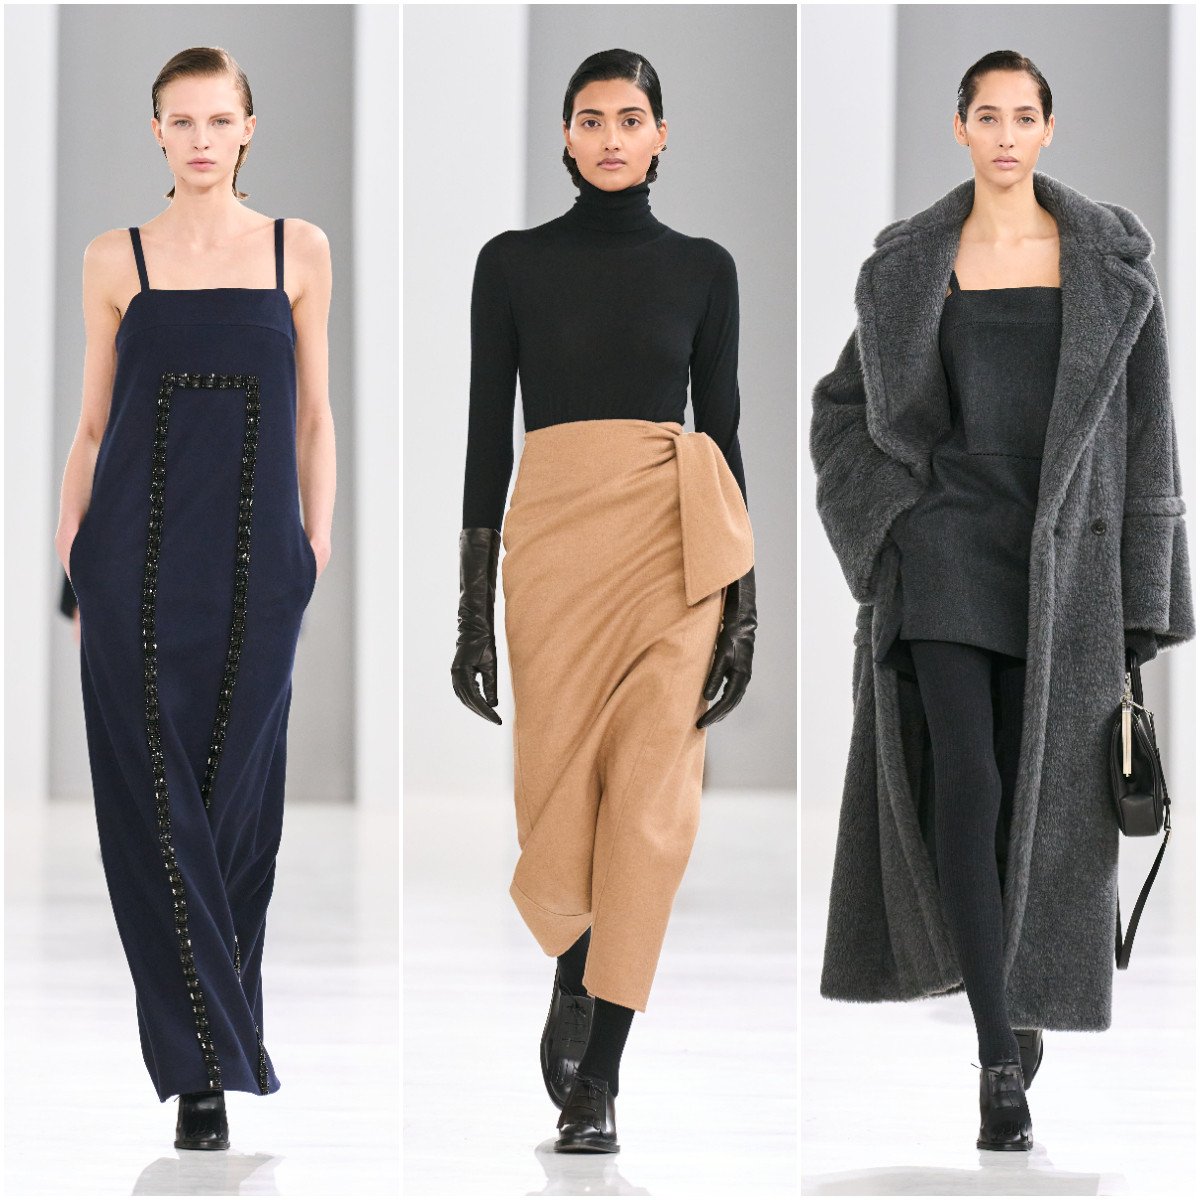 Italian label Max Mara creates stylish ready-to-wear pieces that stand the test of time. Photos: Max Mara